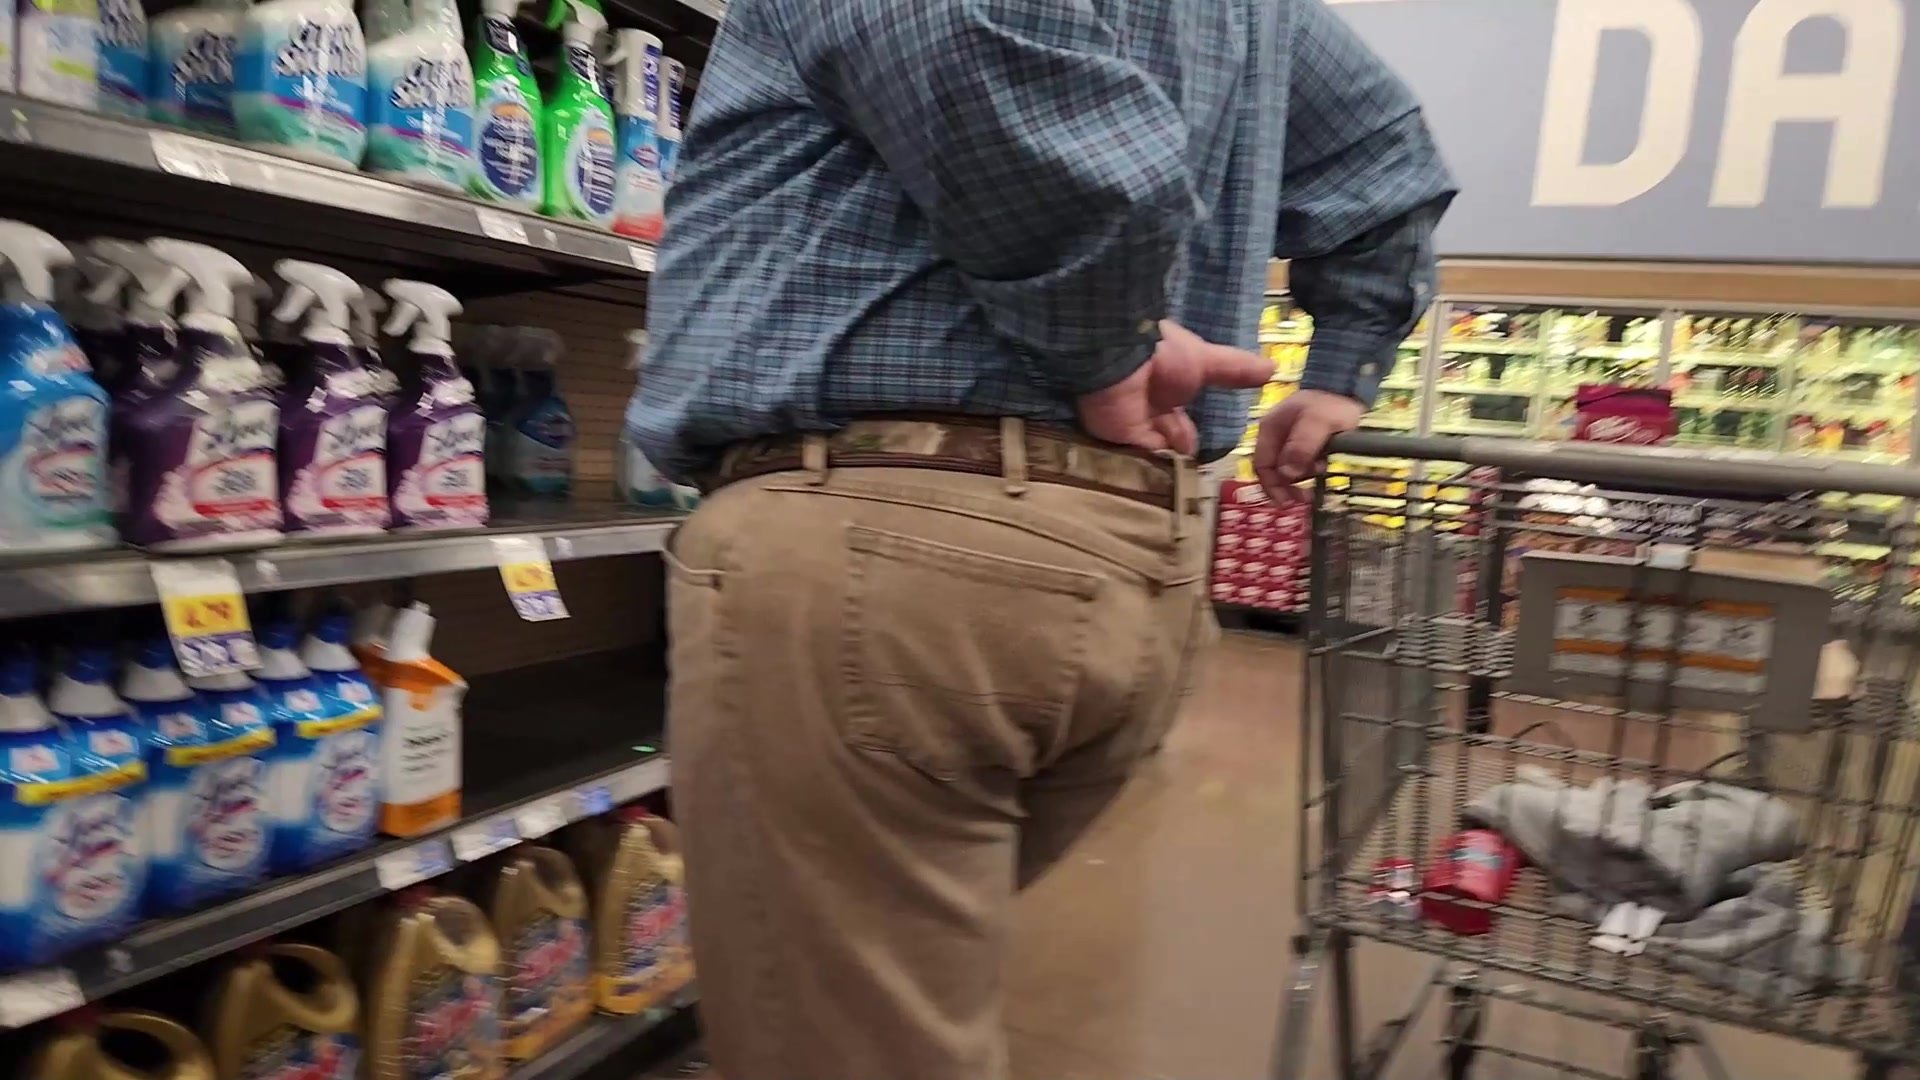 Chubby Daddy's Fat Ass with his hands in his pants